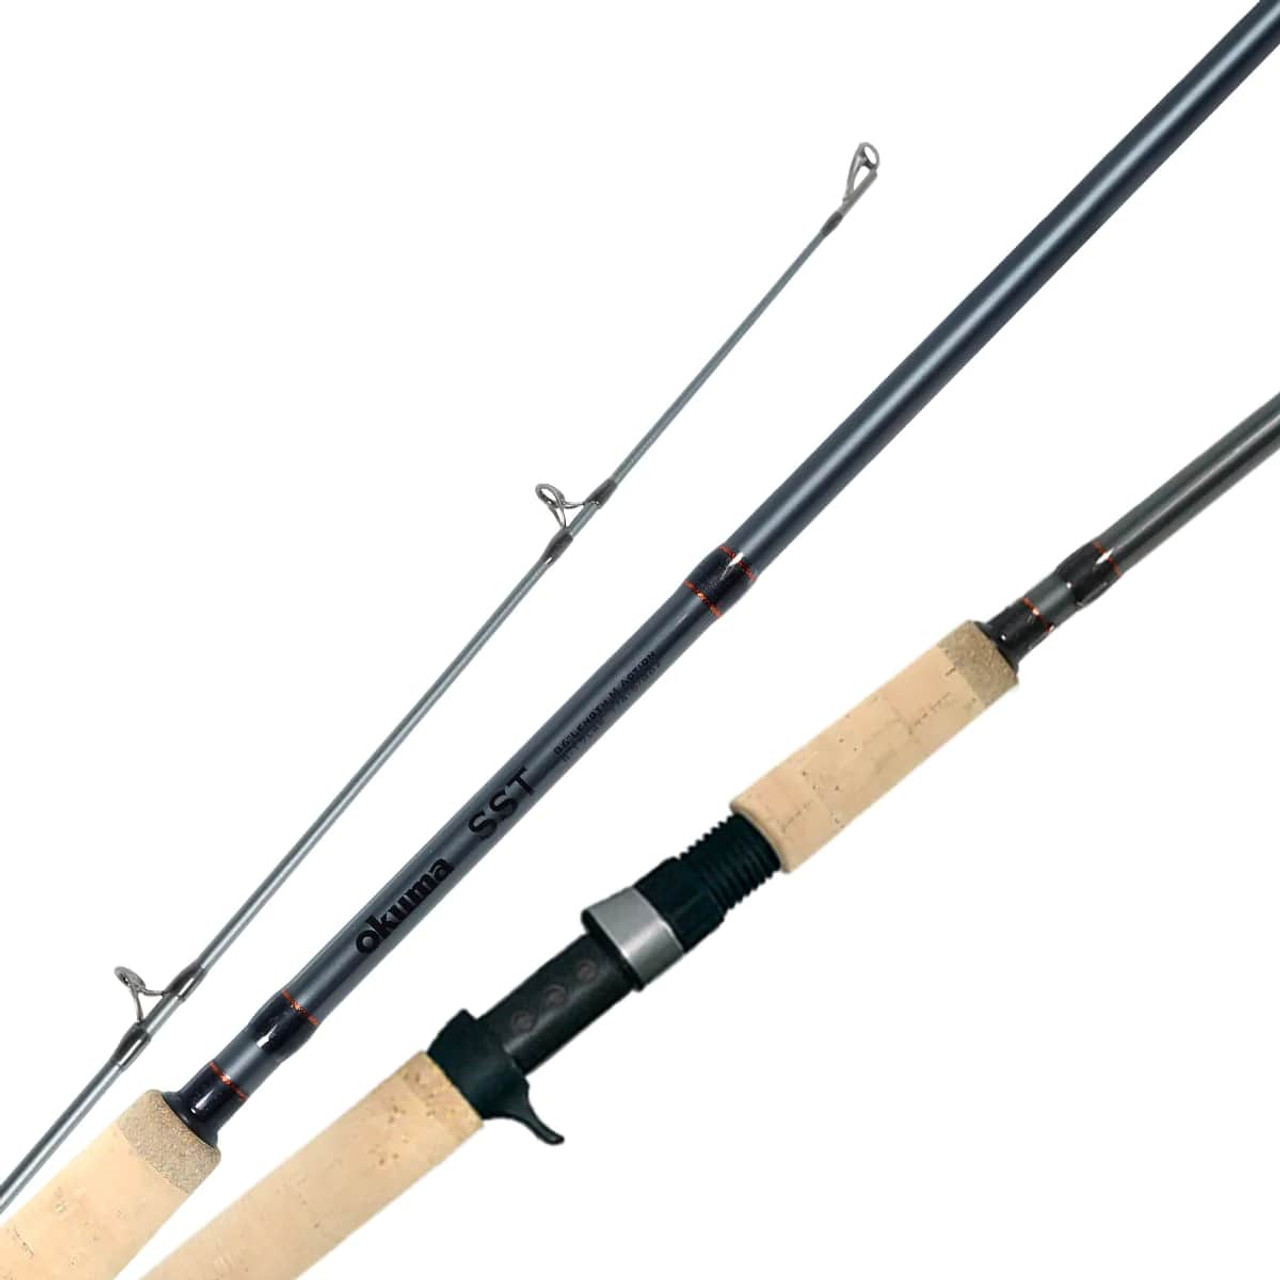 Okuma SST New generation SST Fishing rod with carbon grips ML 6-12LB 10'6  2PC SPIN CP-5 - SteelheadStuff Float and Fly Gear